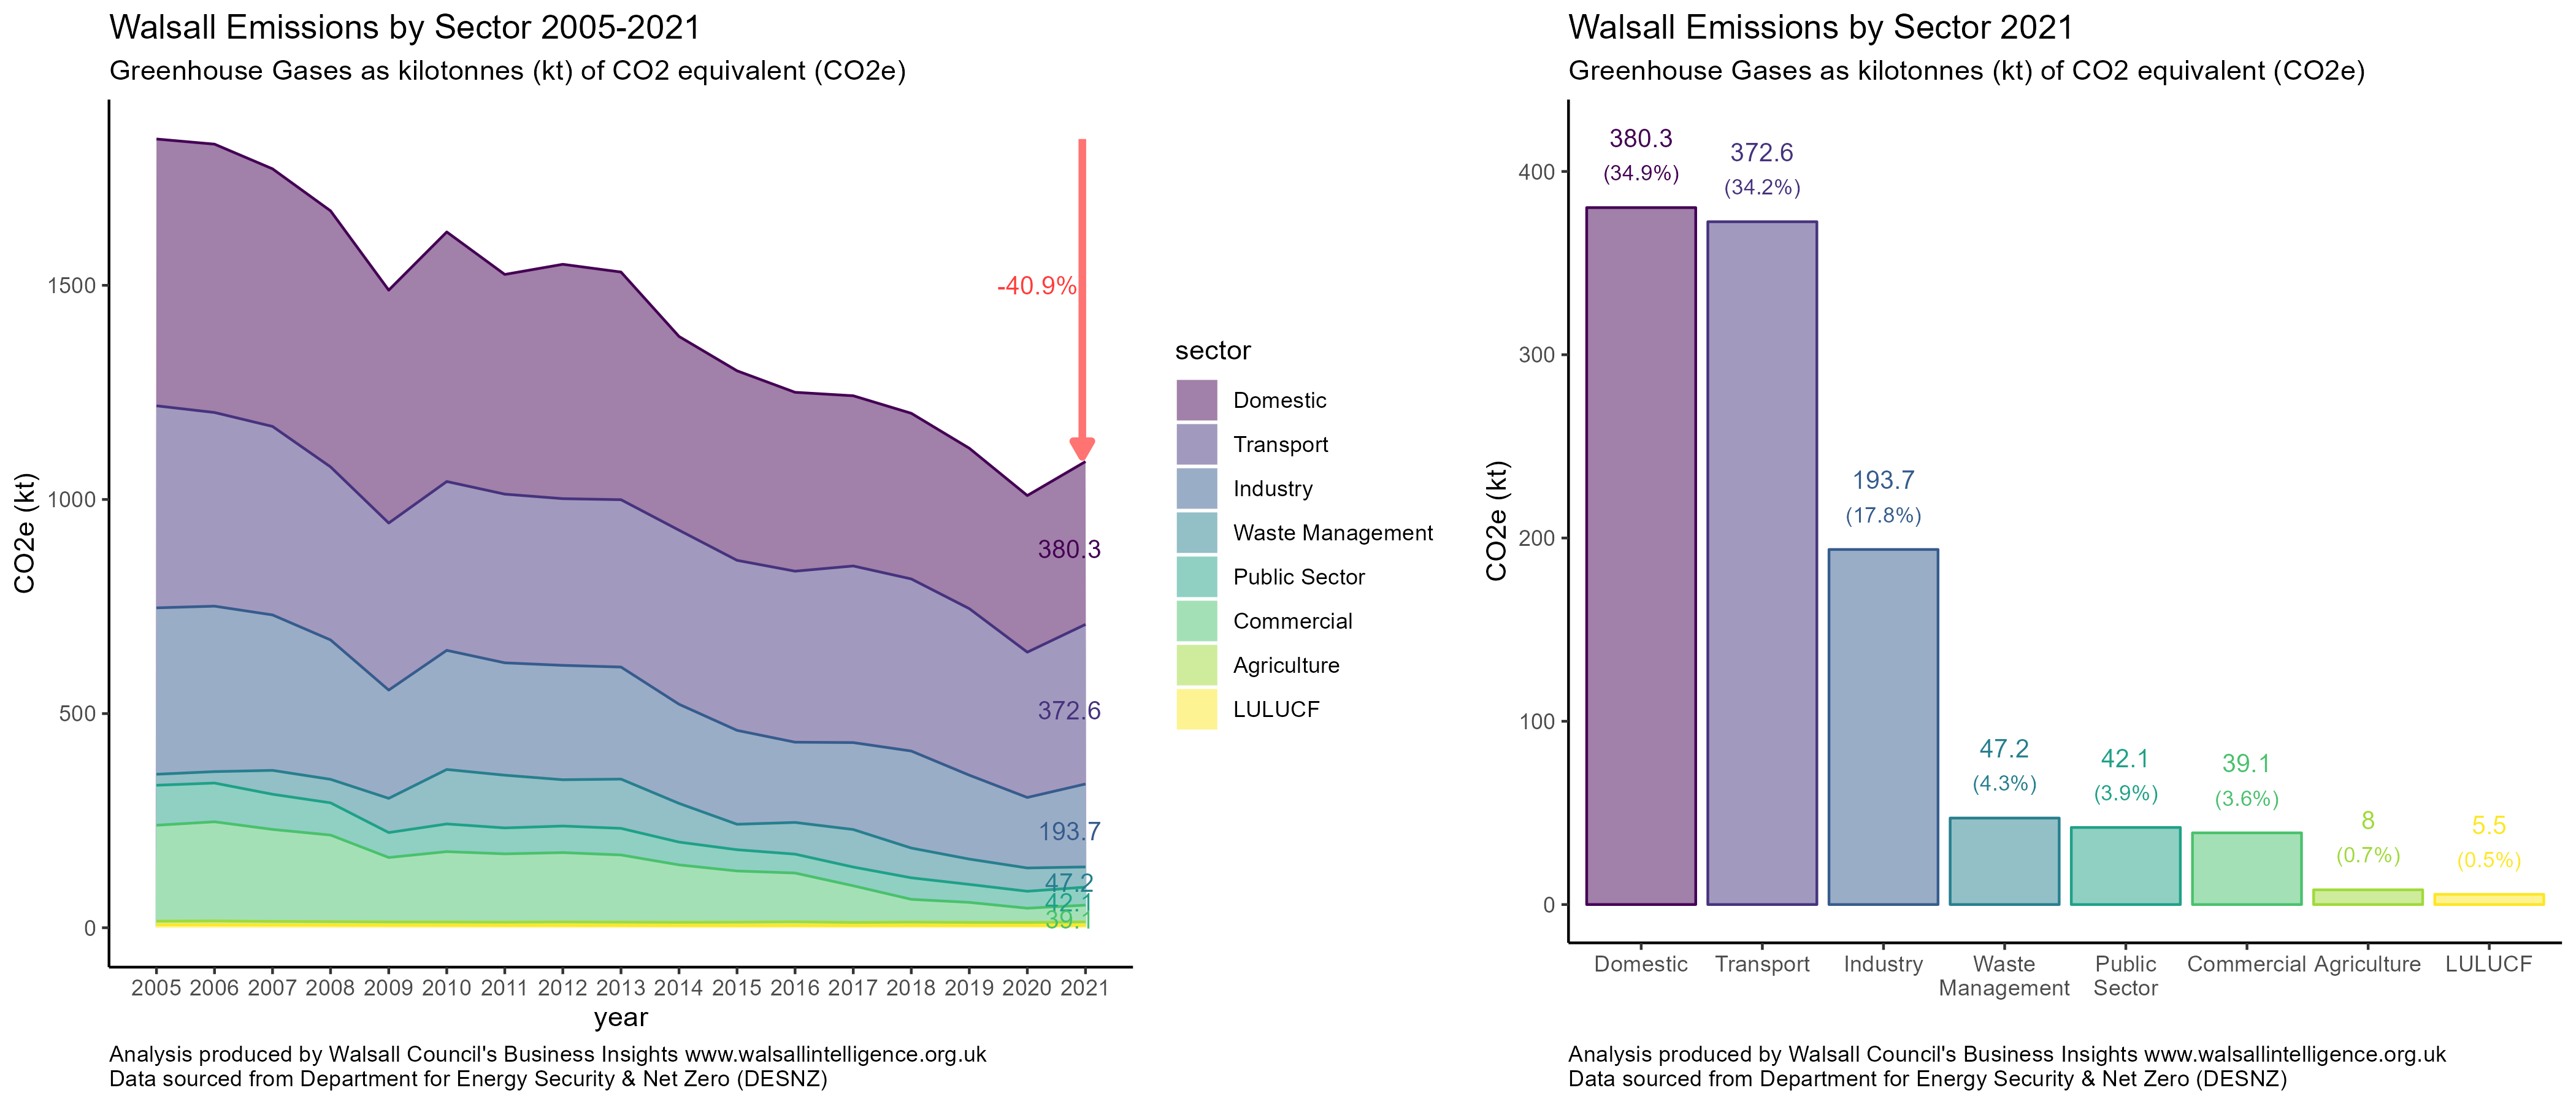 Charts depicting Greenhouse Gas Estimates by Sector for Walsall Borough